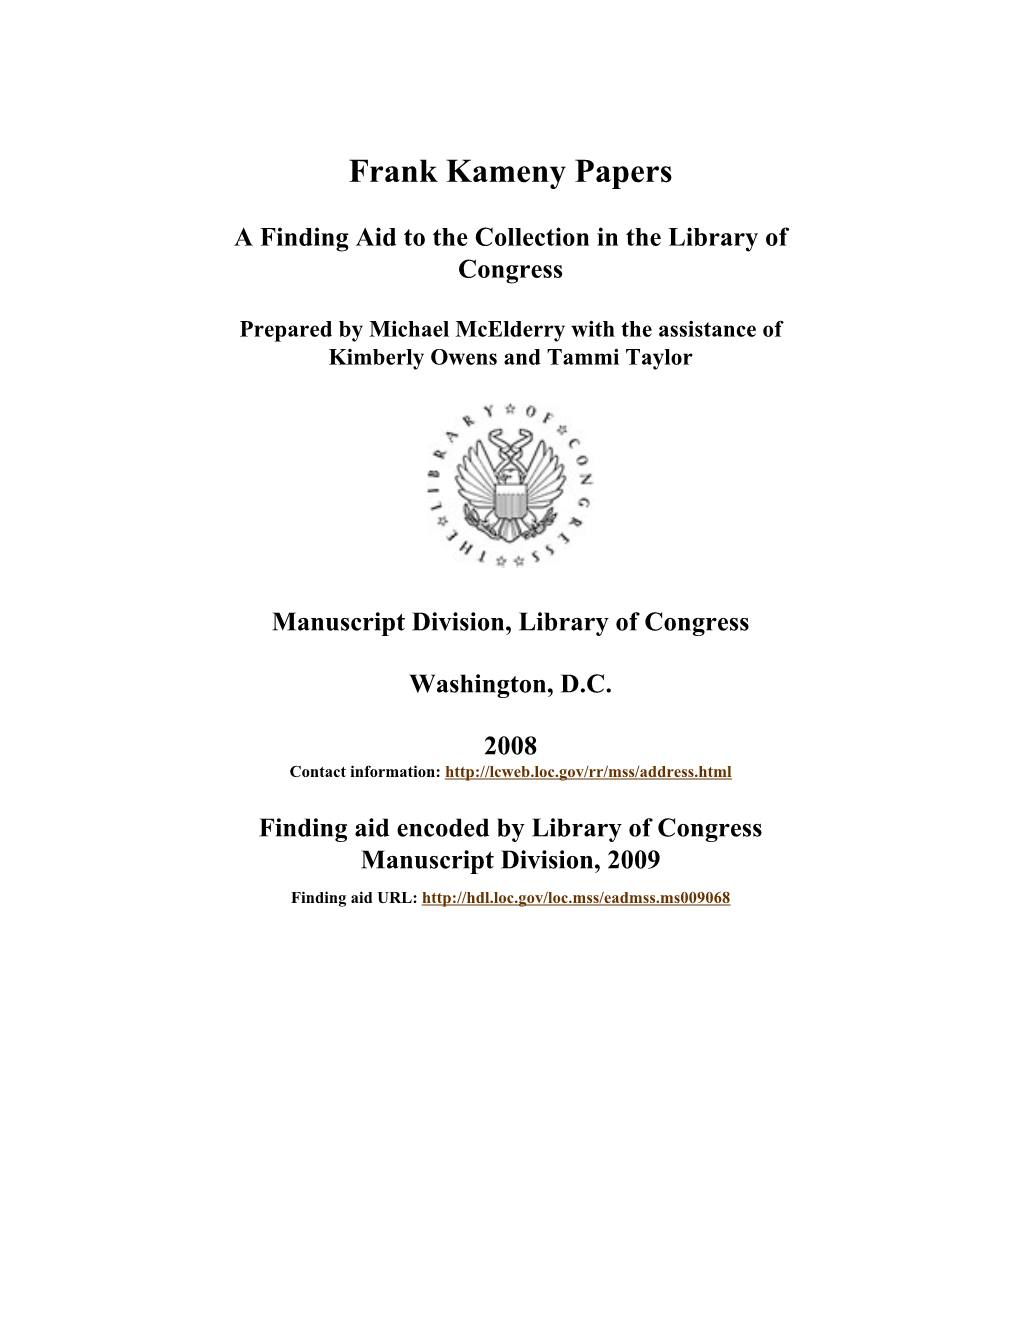 Frank Kameny Papers